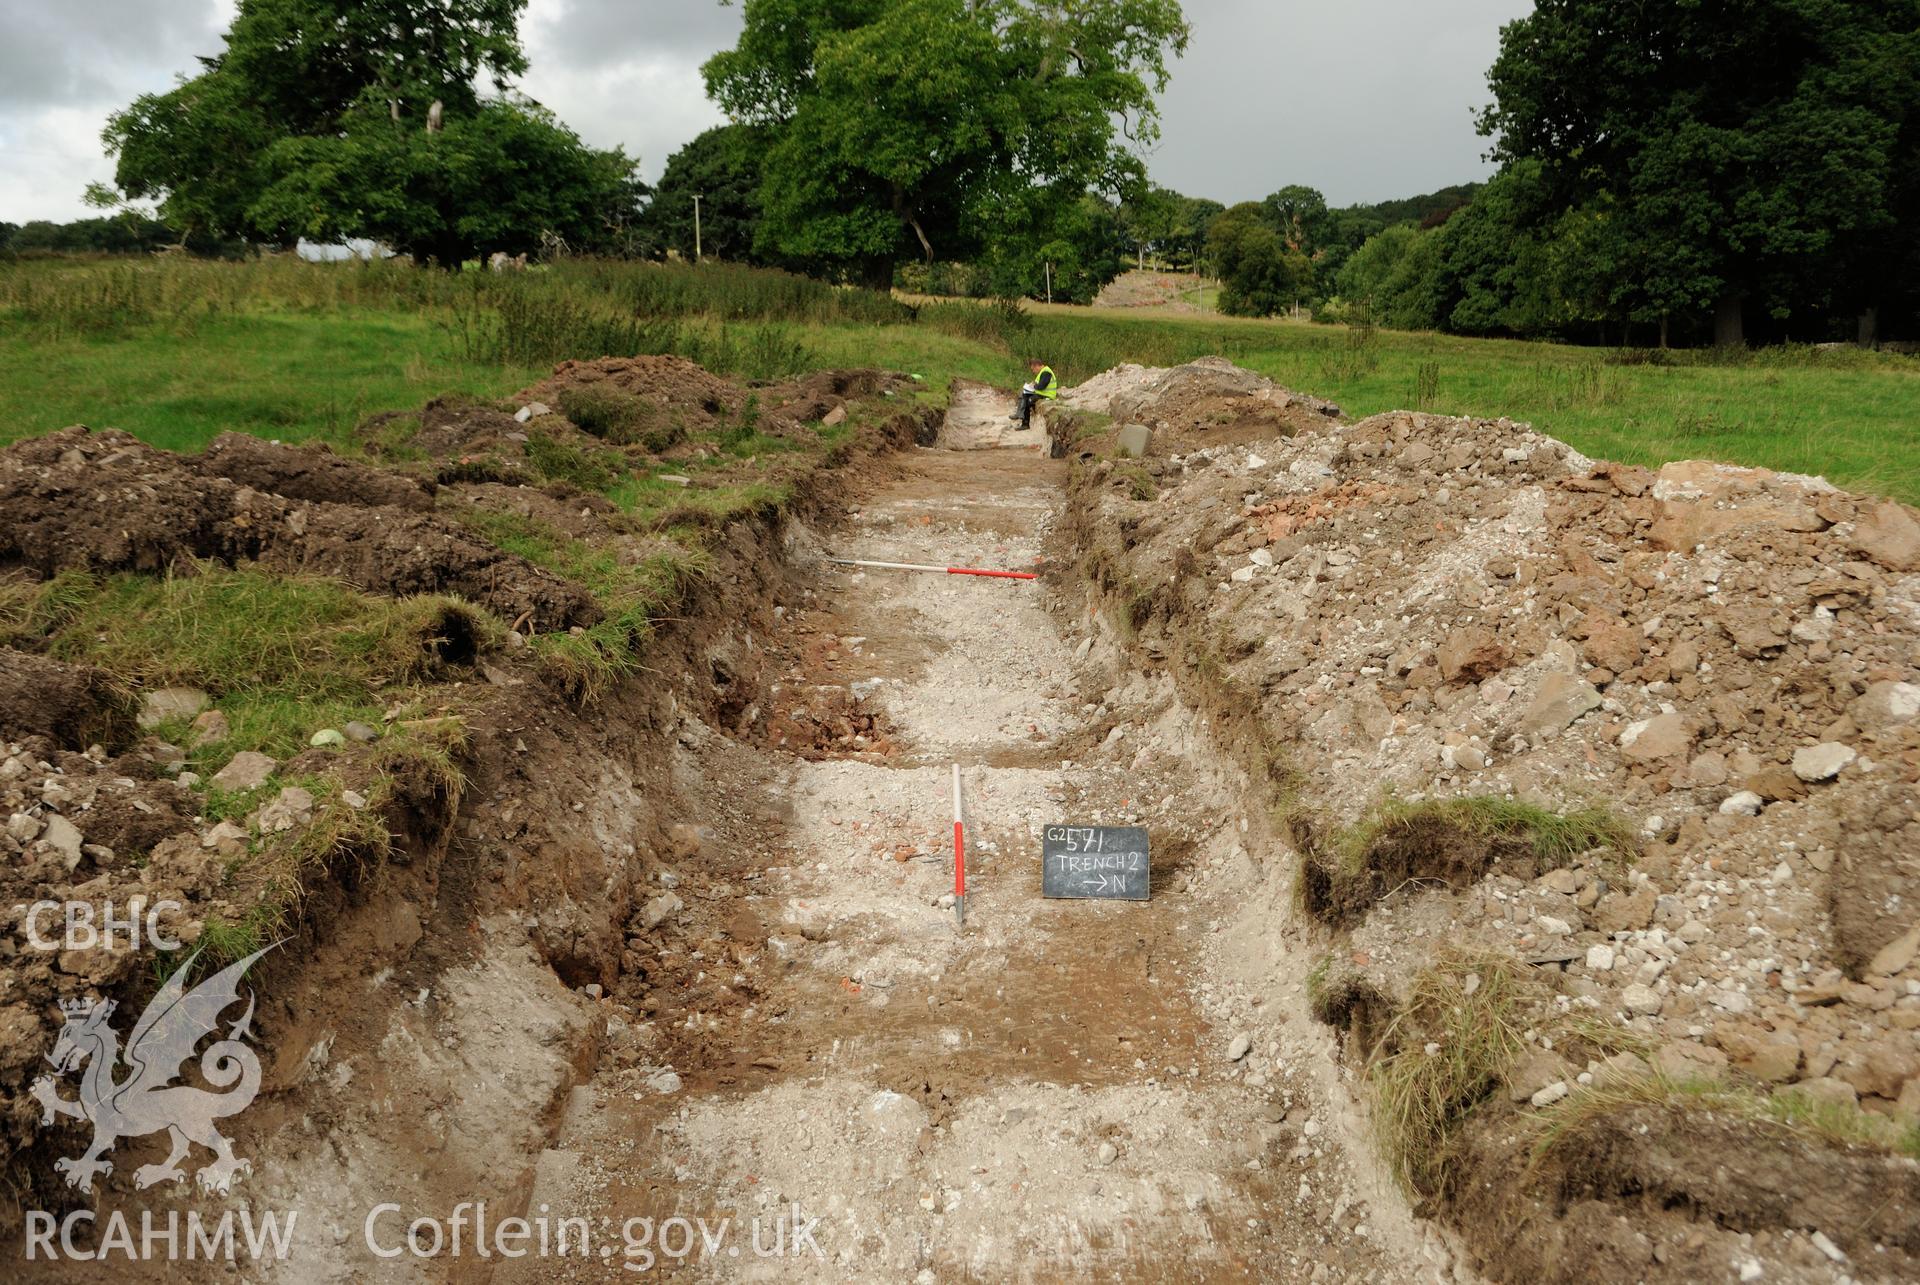 View from the east of Trench 2, post-excavation. Photographed during archaeological evaluation of Kinmel Park, Abergele, conducted by Gwynedd Archaeological Trust on 24th August 2018. Project no. 2571.